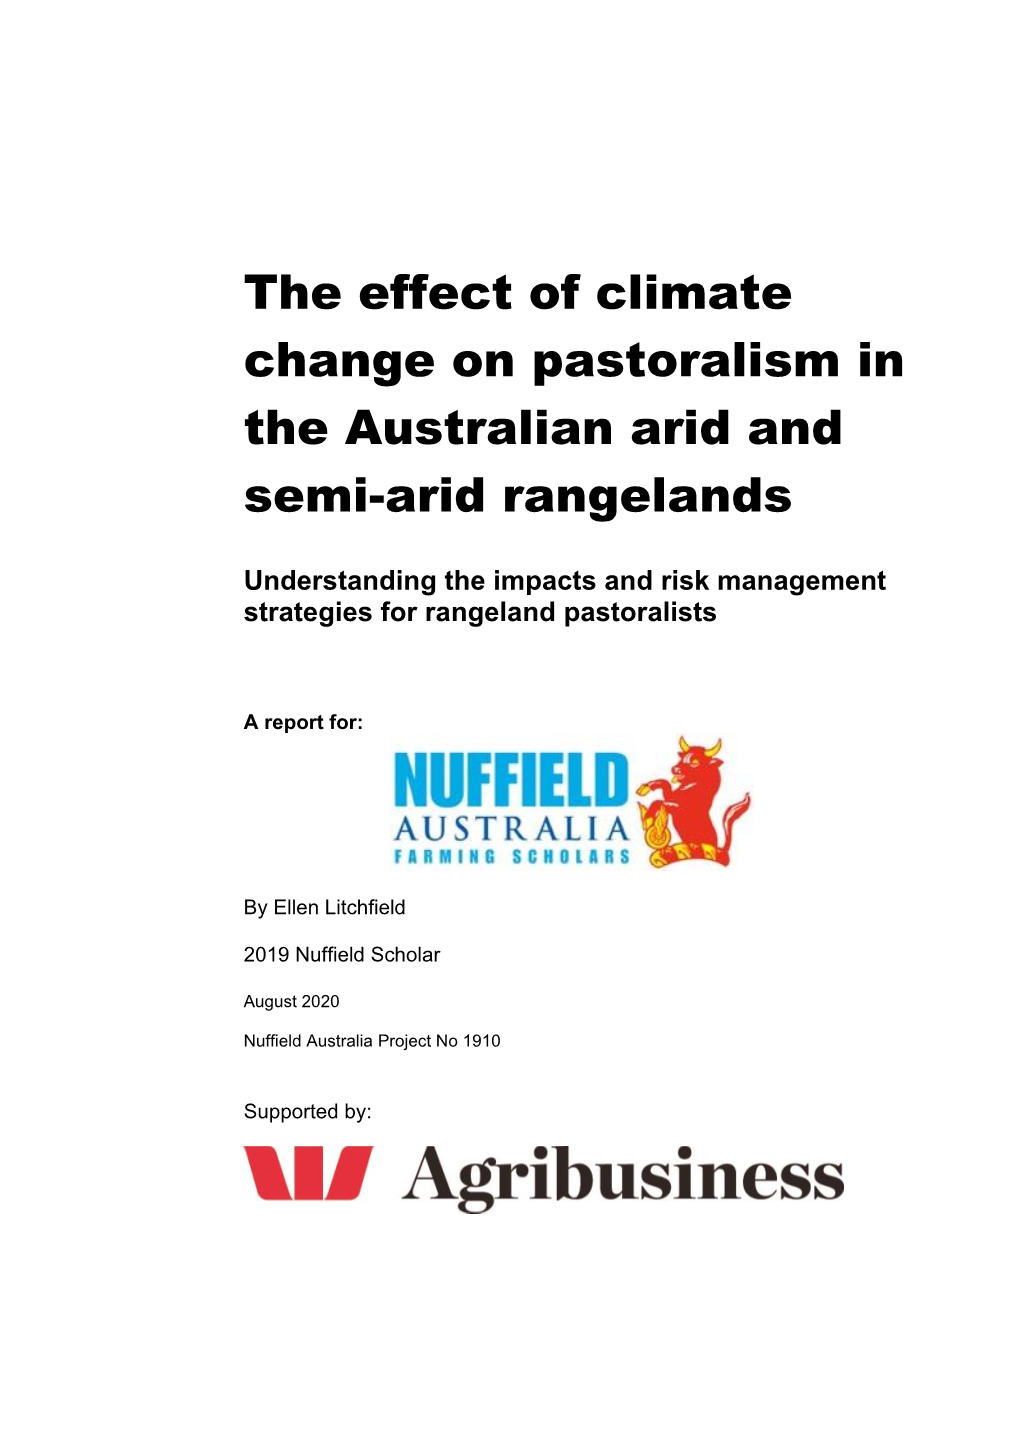 The Effect of Climate Change on Pastoralism in the Australian Arid and Semi-Arid Rangelands